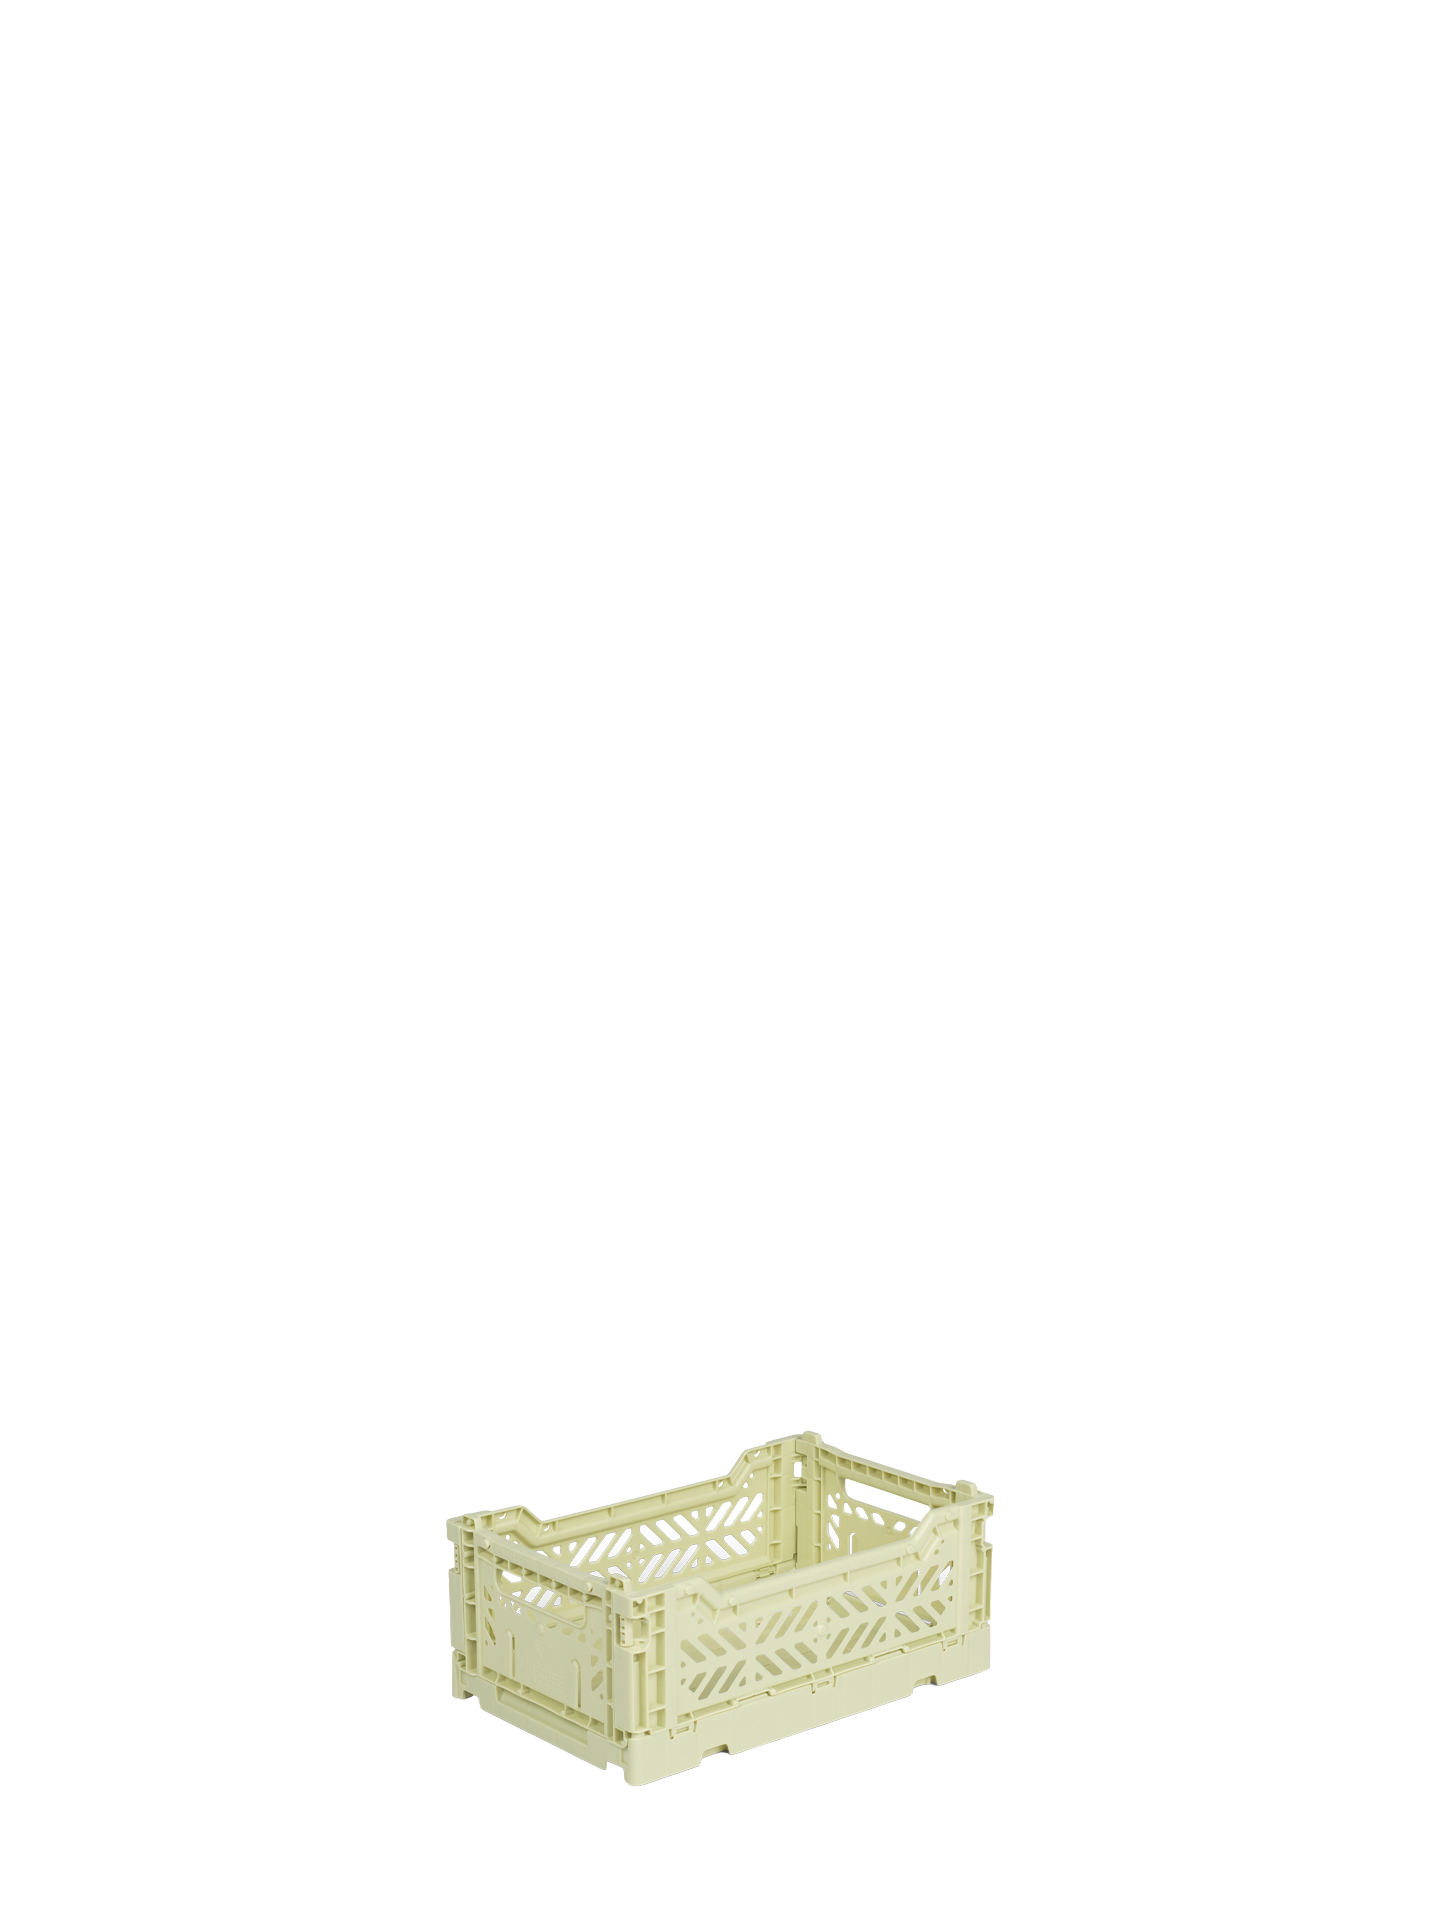 Mini Aykasa crate in light pastel melon green stacks and folds